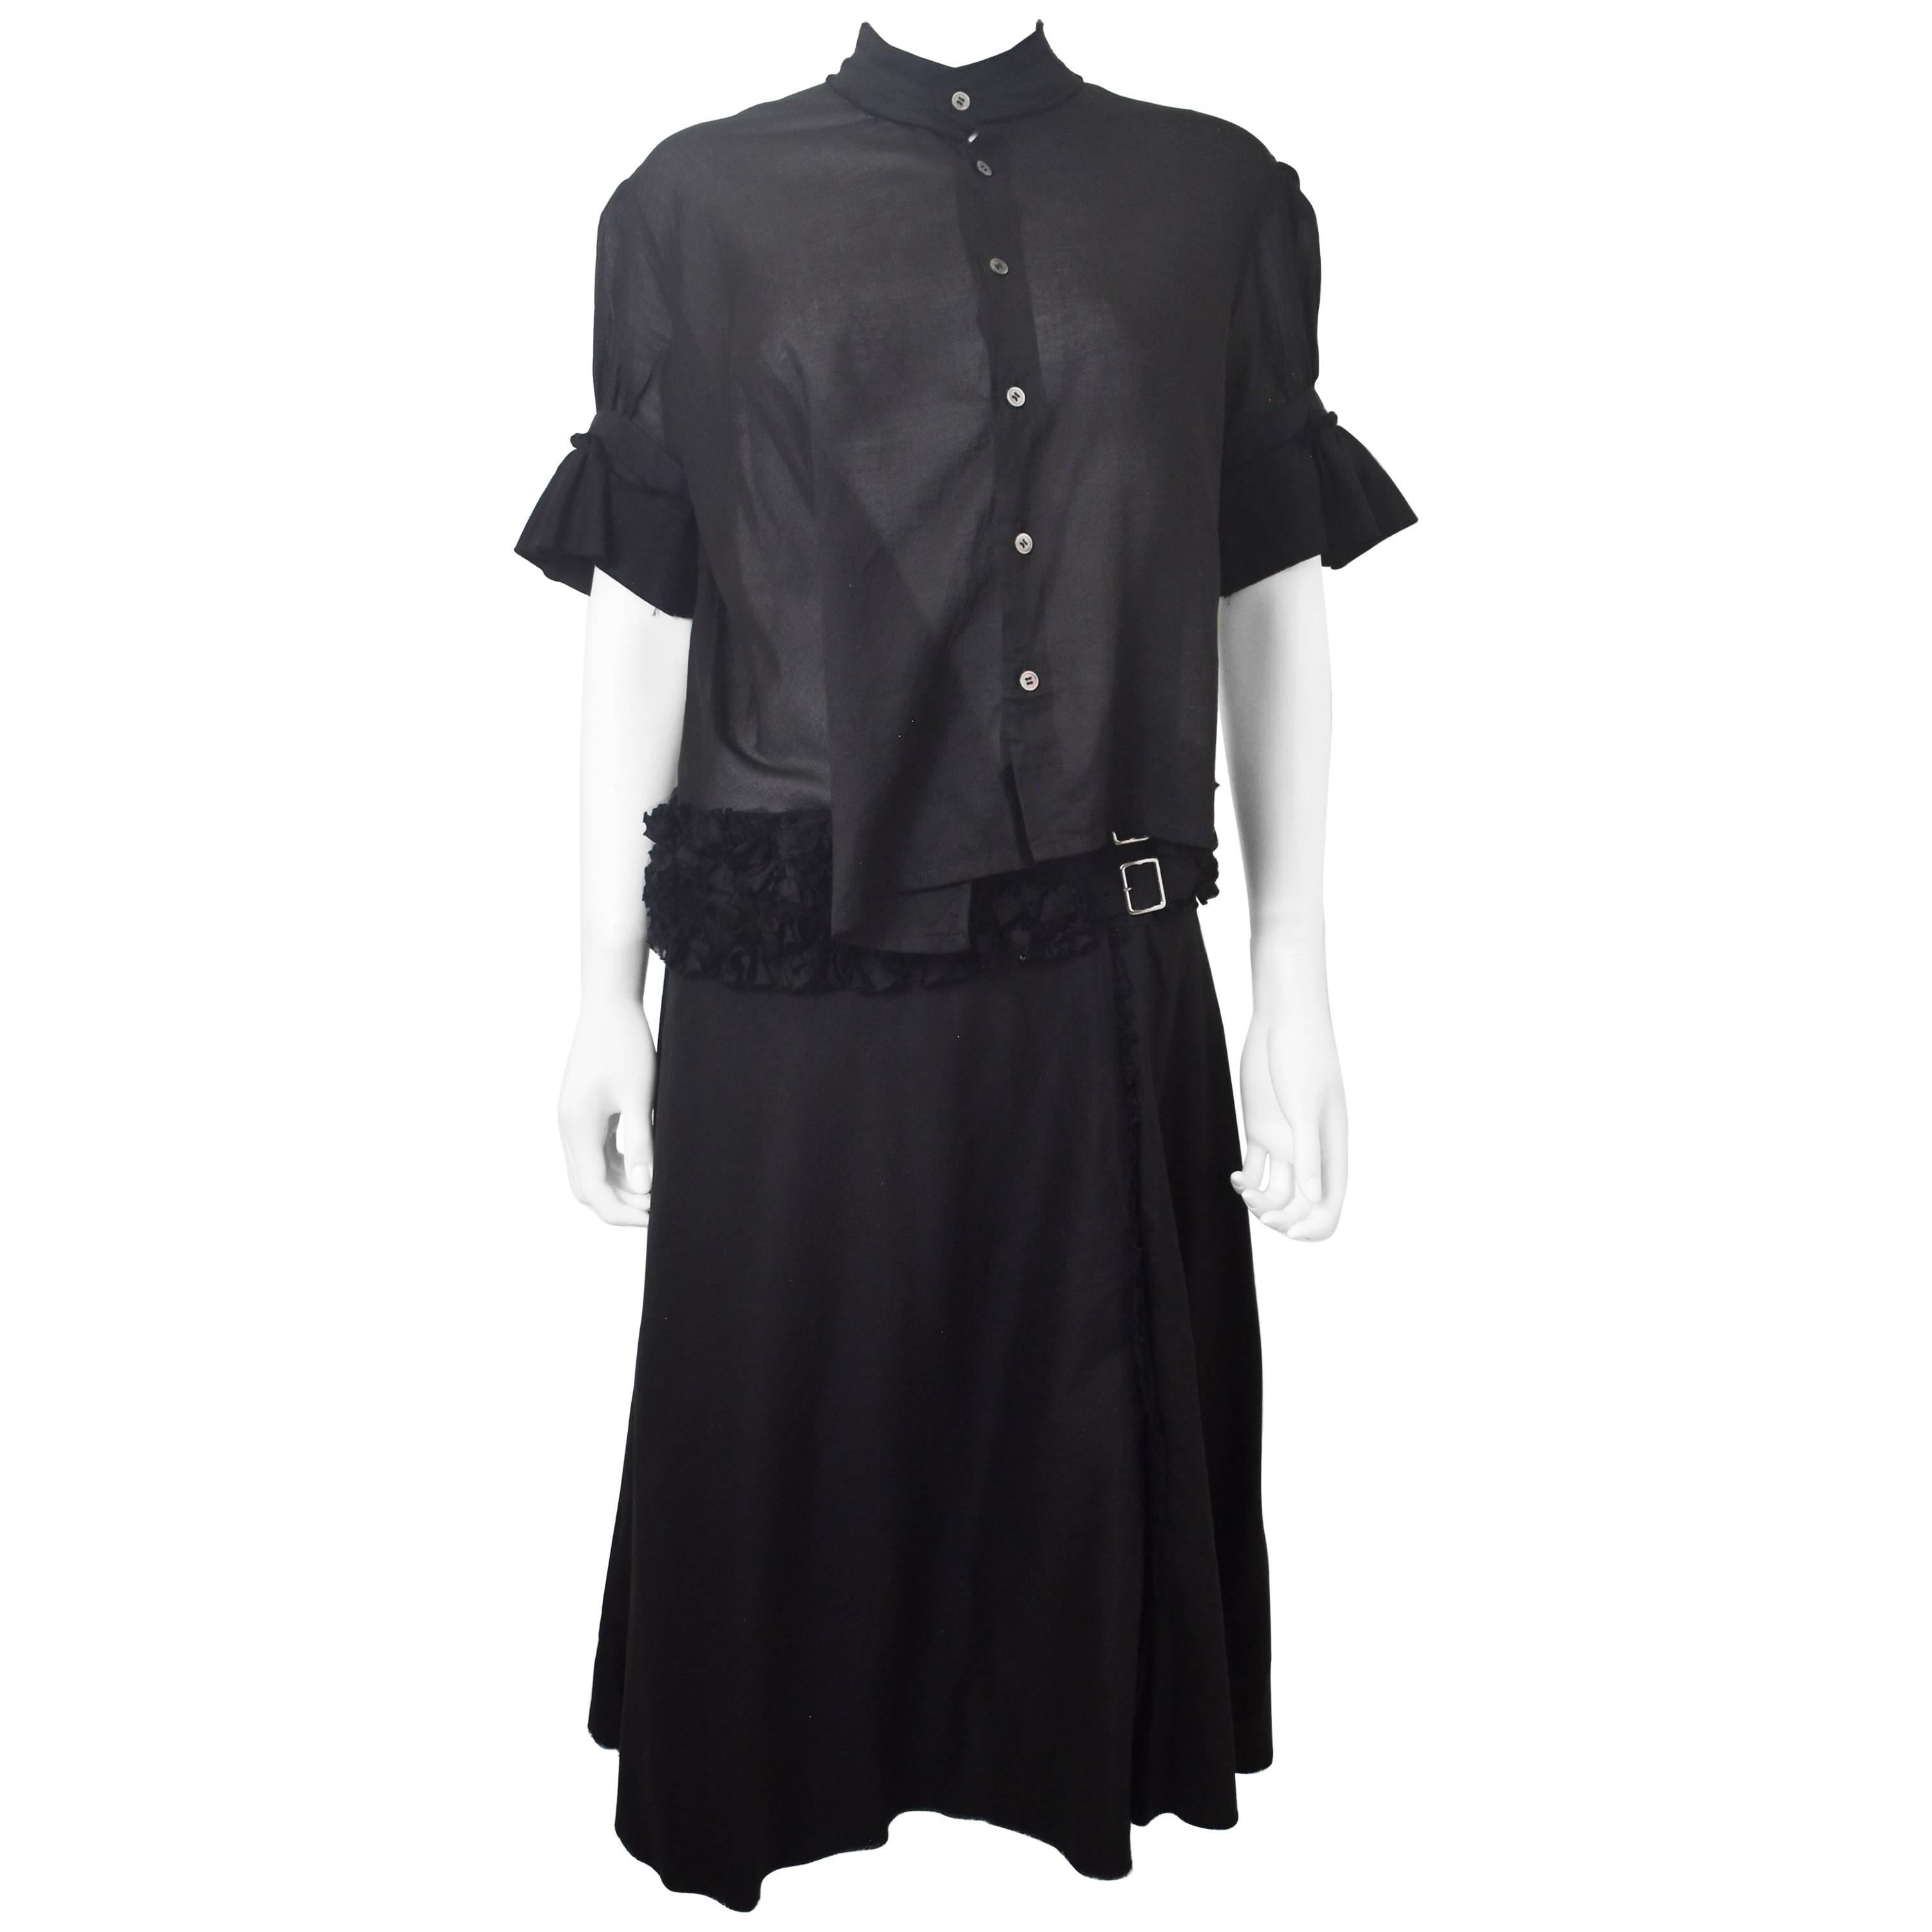 Comme des Garcons Tricot Black Dress with Sheer Top and Ruffle Detail Skirt 2007